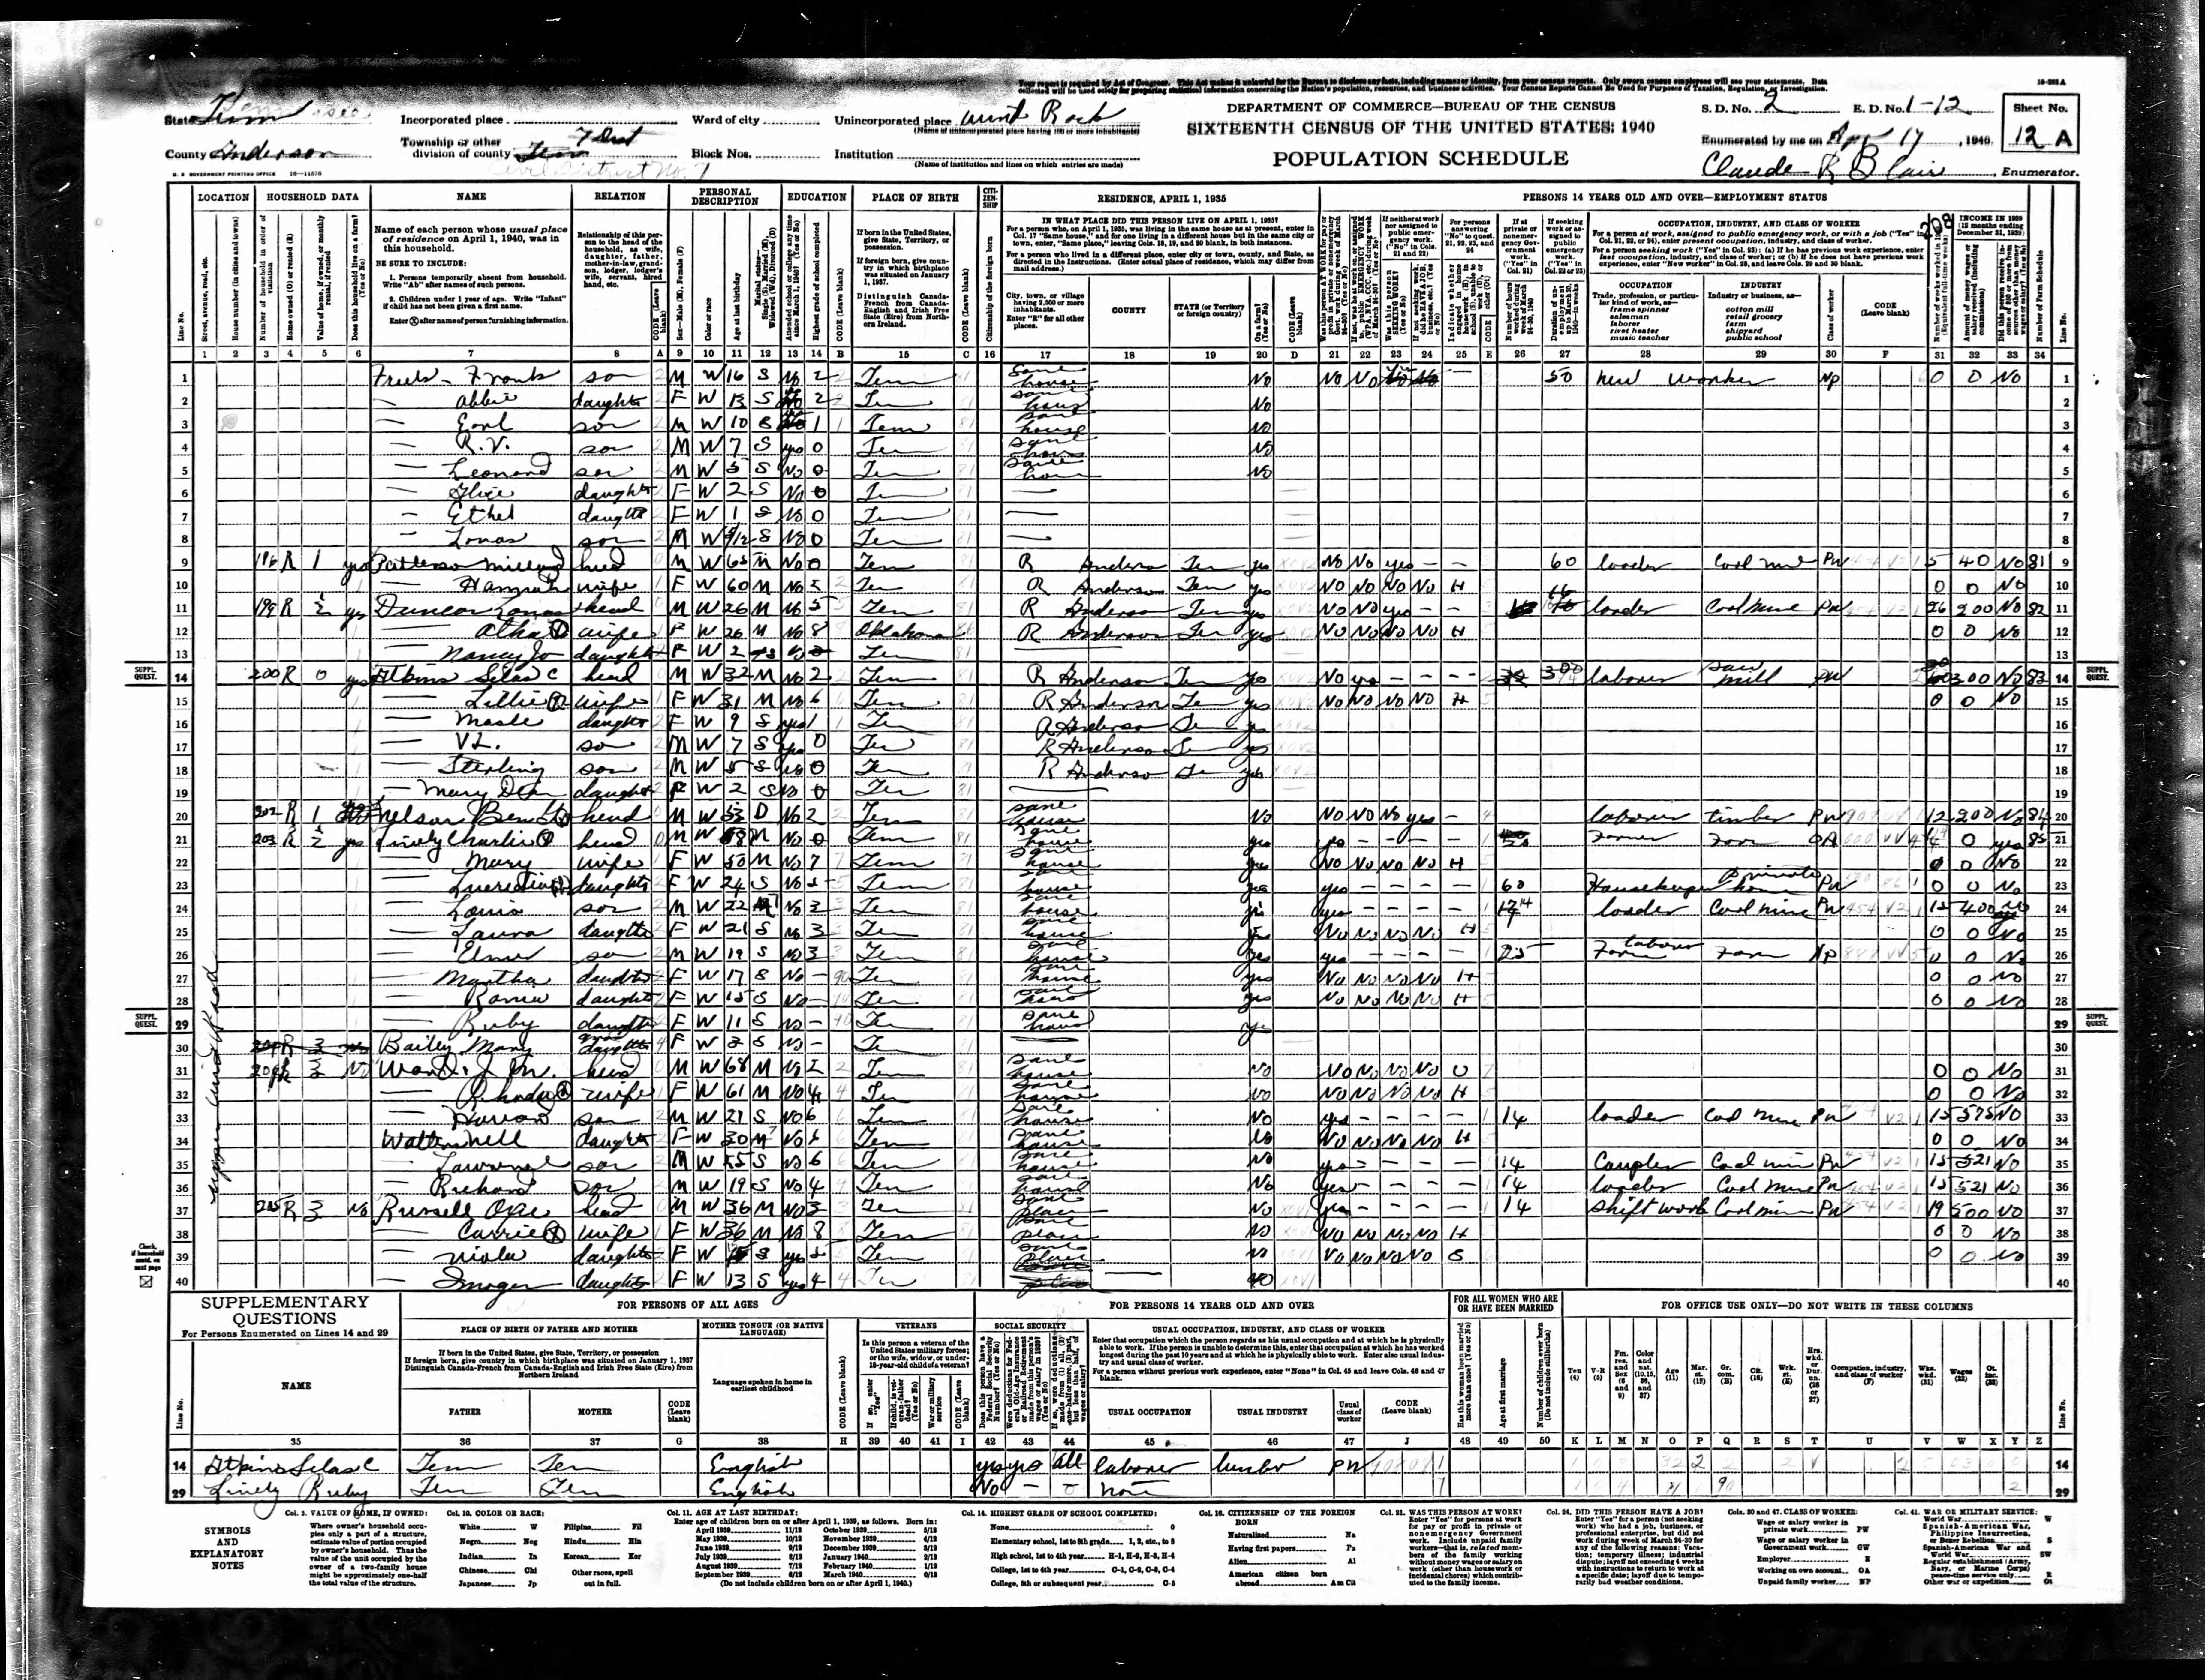 1940 U.S. Census, Anderson County, Tennessee, Dist. 7, page 208a